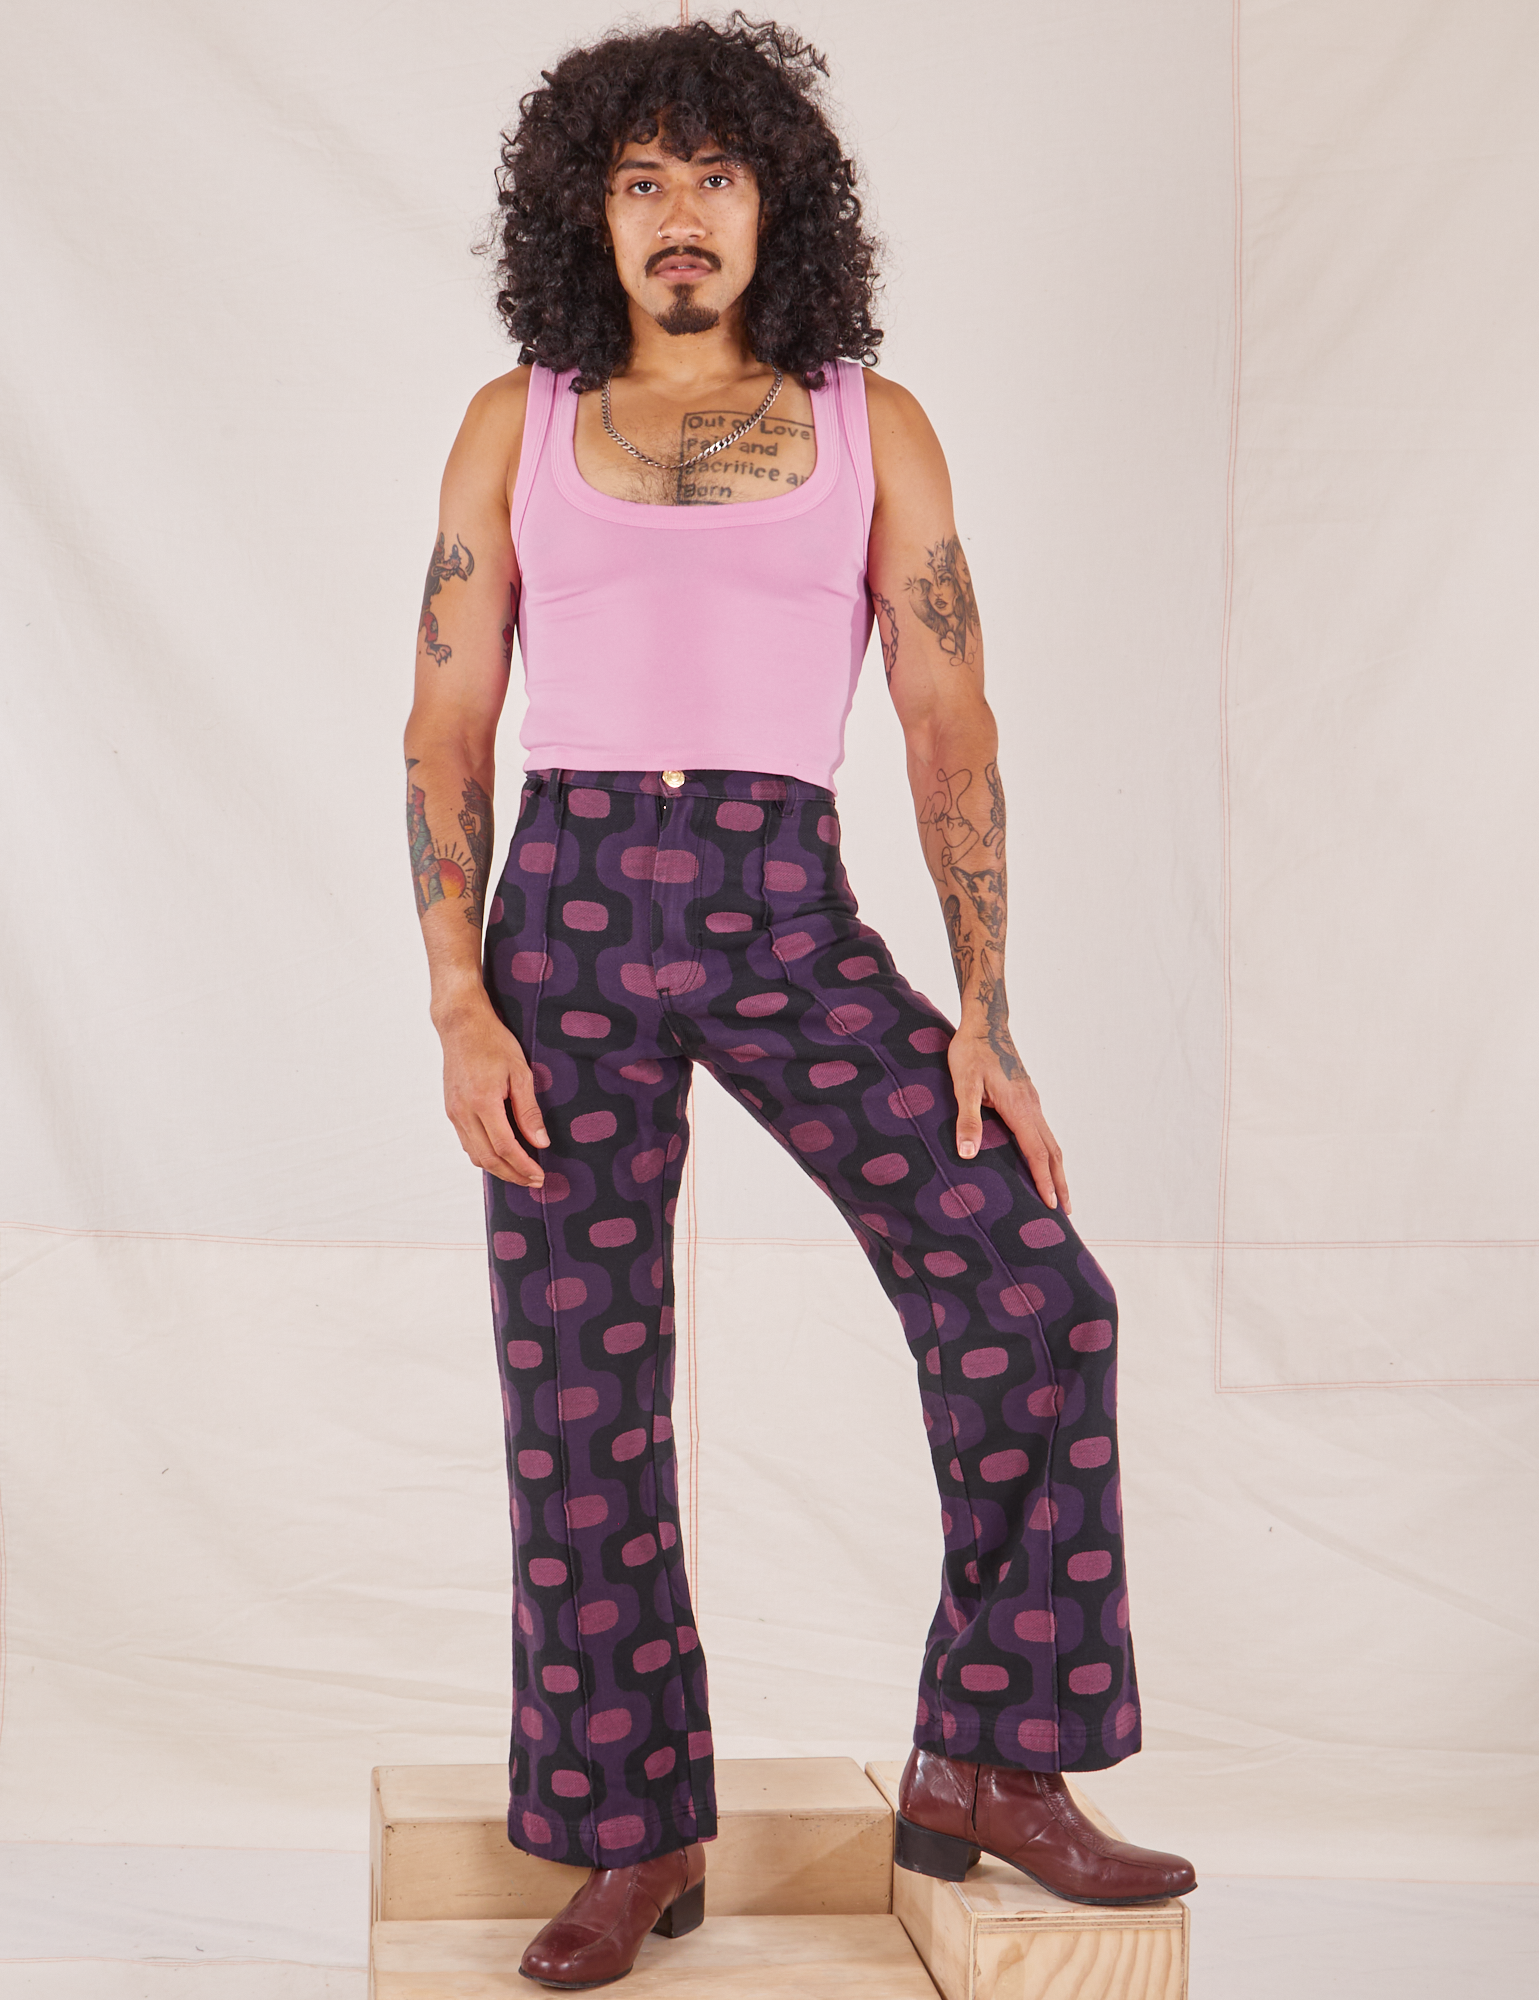 Jesse is 5&#39;8&quot; and wearing XS Western Pants in Purple Tile Jacquard paired with bubblegum pink Cropped Tank Top